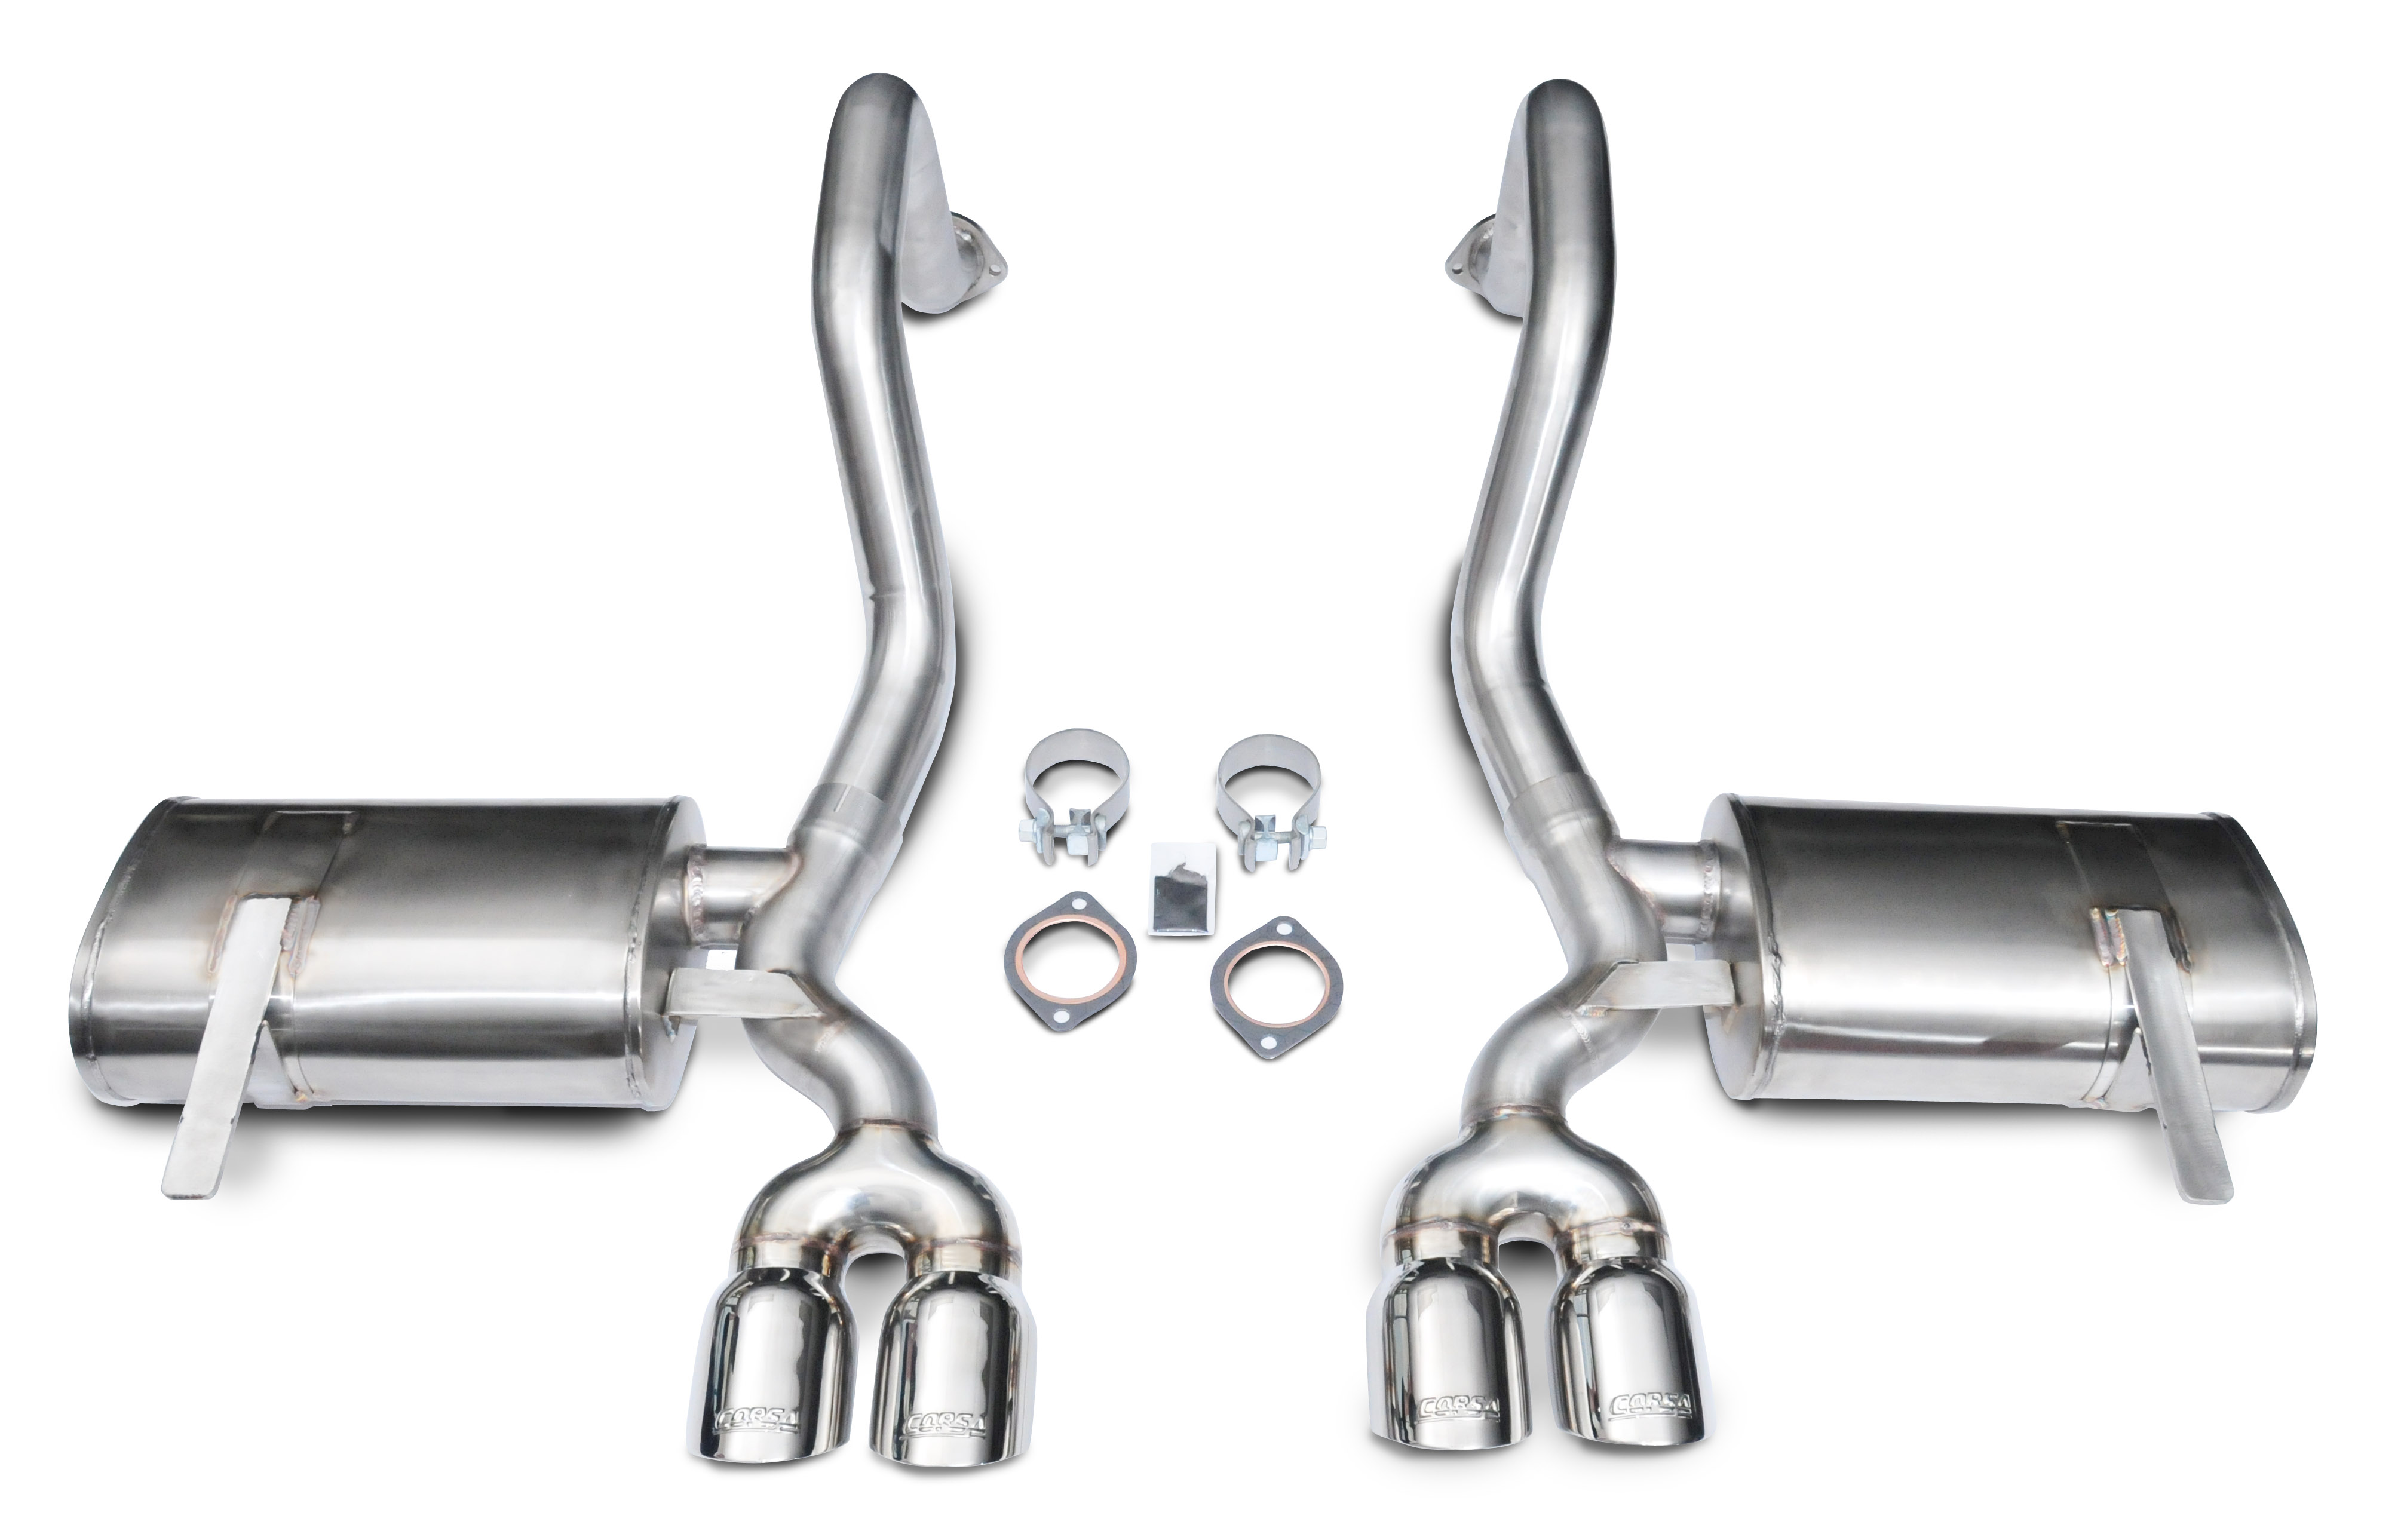 C5 Corvette Corsa Xtreme Exhaust System 3.5" Pro-Series Stainless Steel Tips